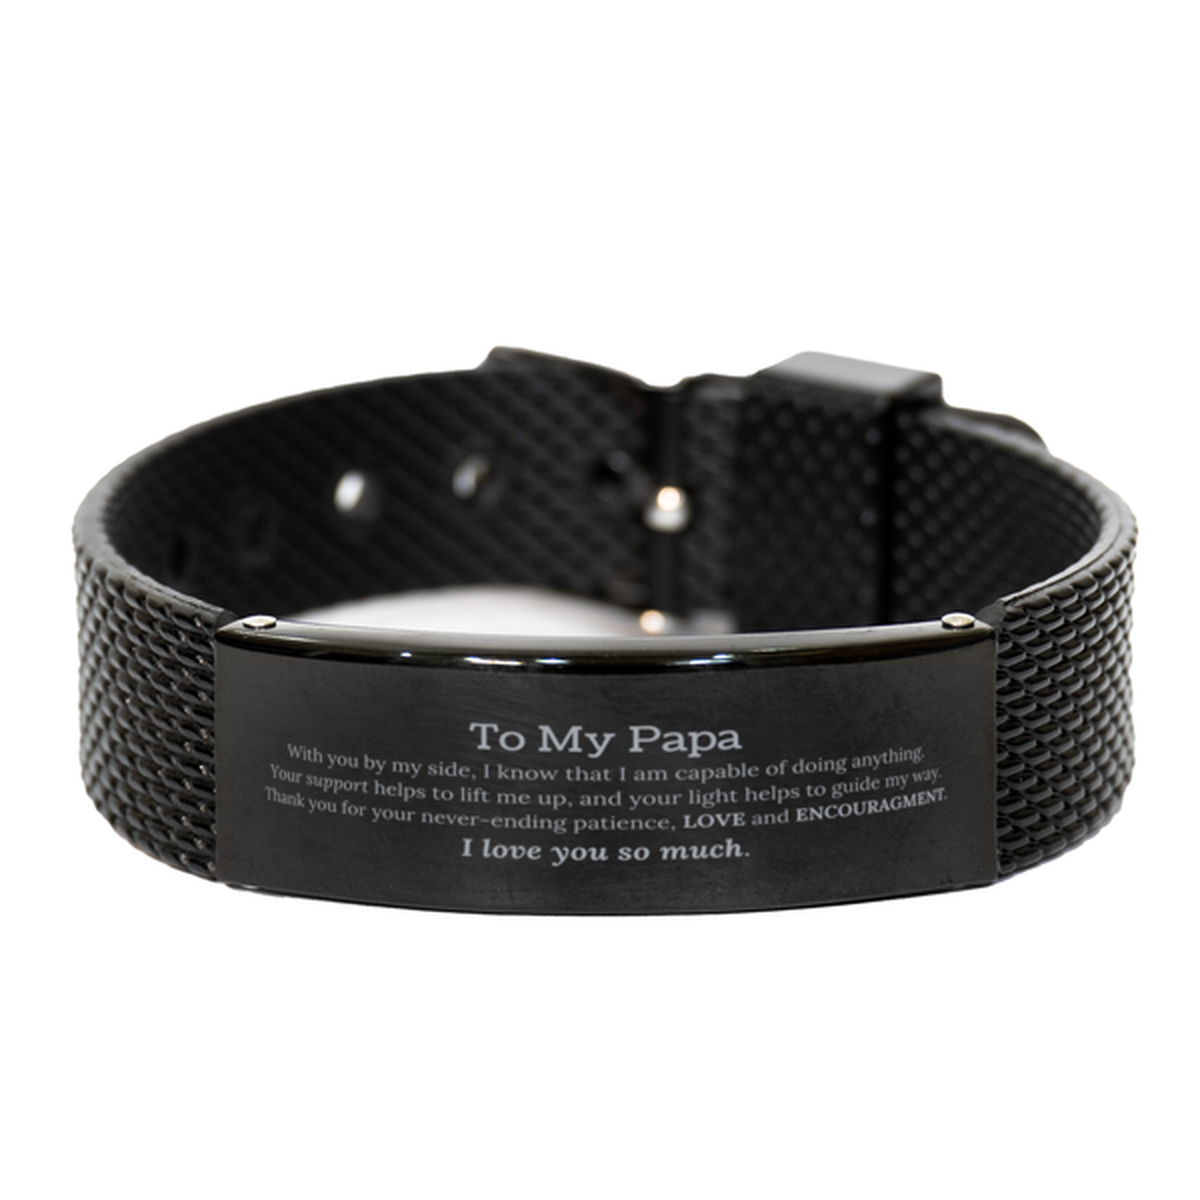 Appreciation Papa Black Shark Mesh Bracelet Gifts, To My Papa Birthday Christmas Wedding Keepsake Gifts for Papa With you by my side, I know that I am capable of doing anything. I love you so much